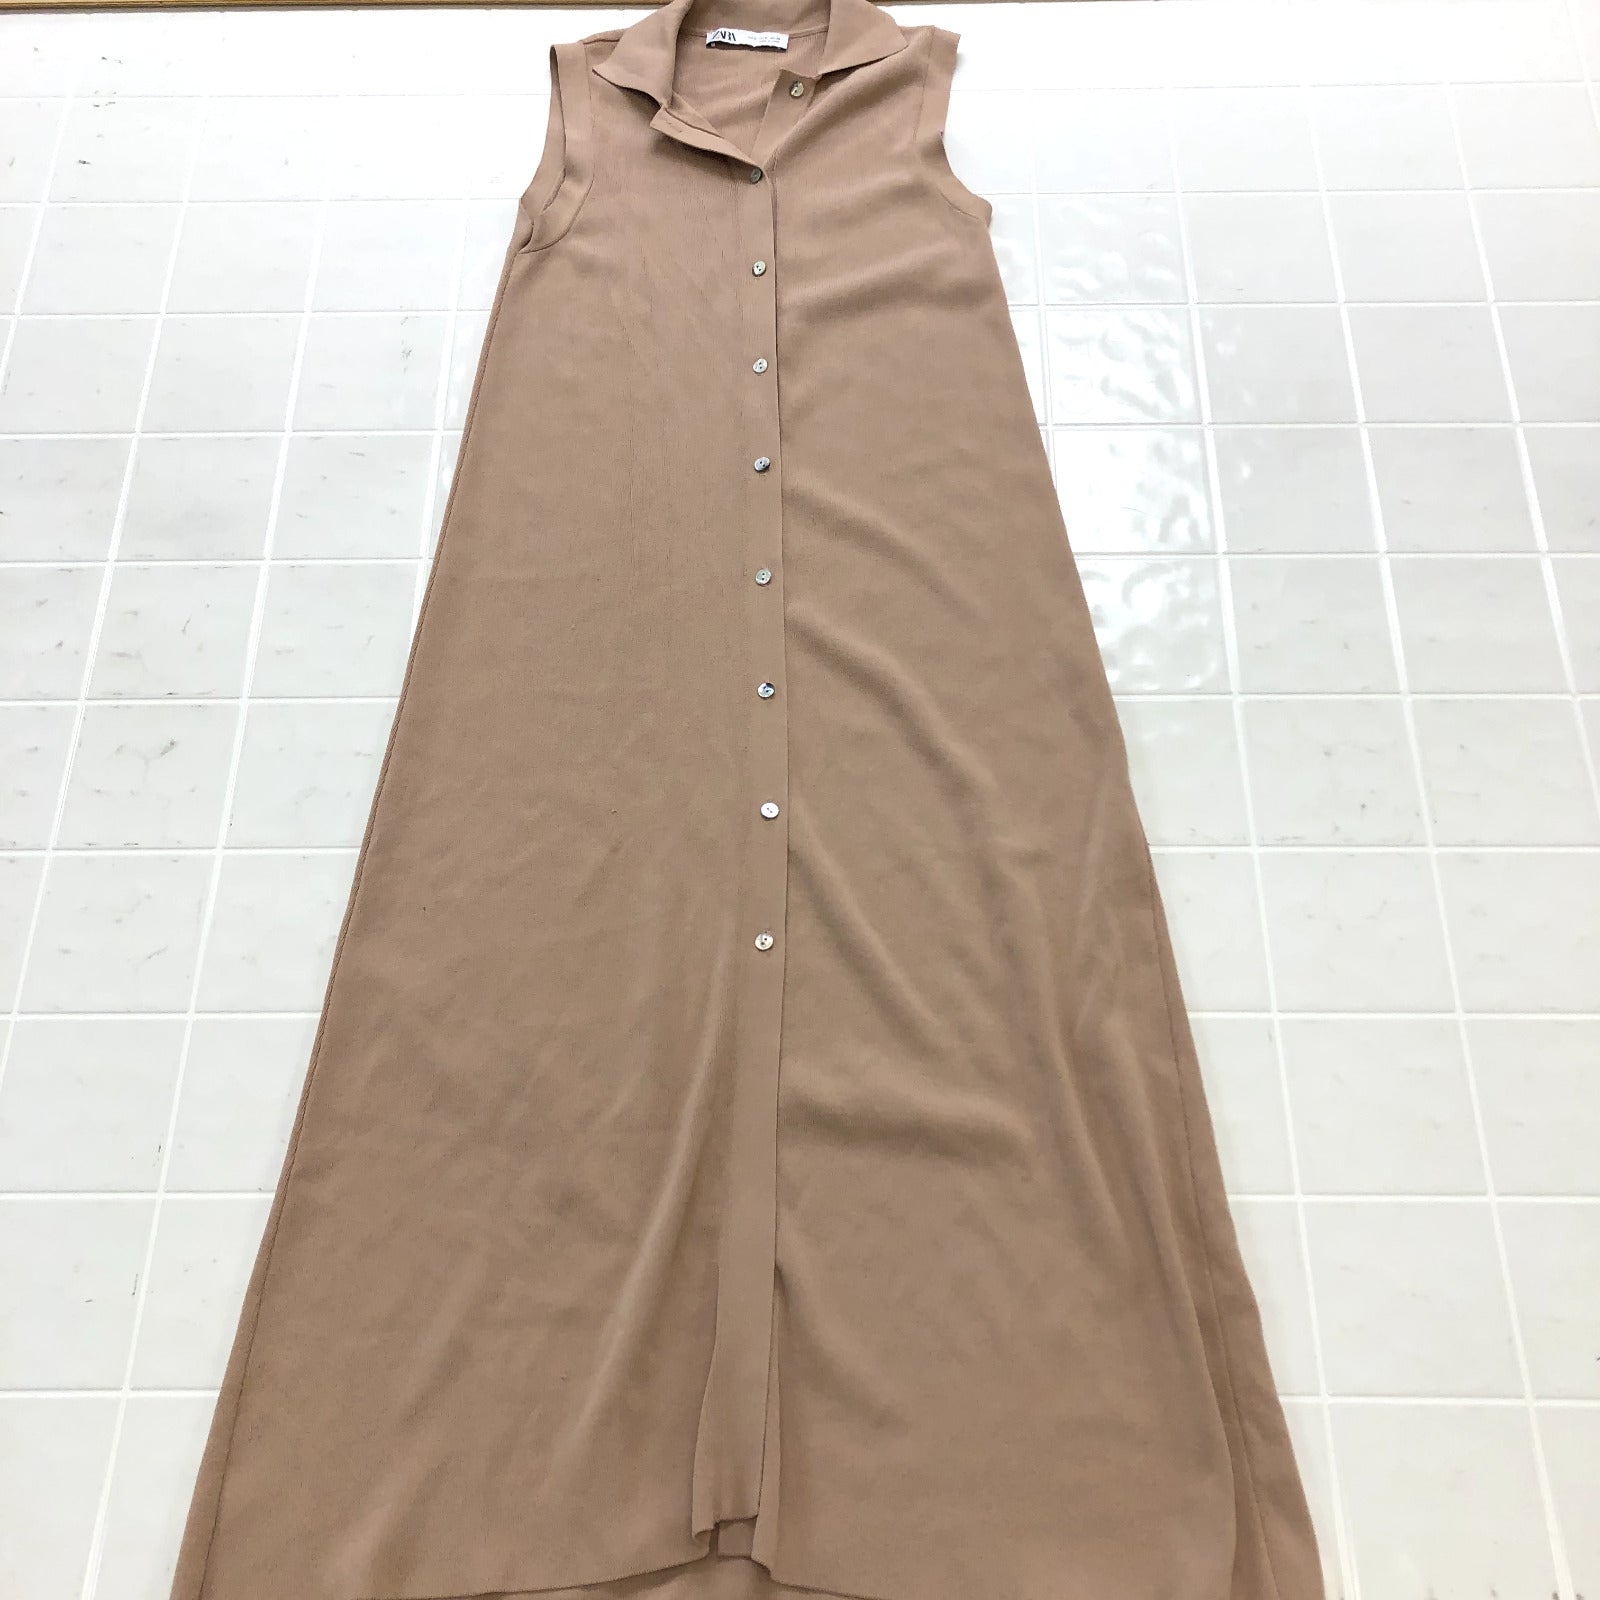 Zara Nude Solid Stretch Regular Collared Button Up Shift Dress Women's Size S